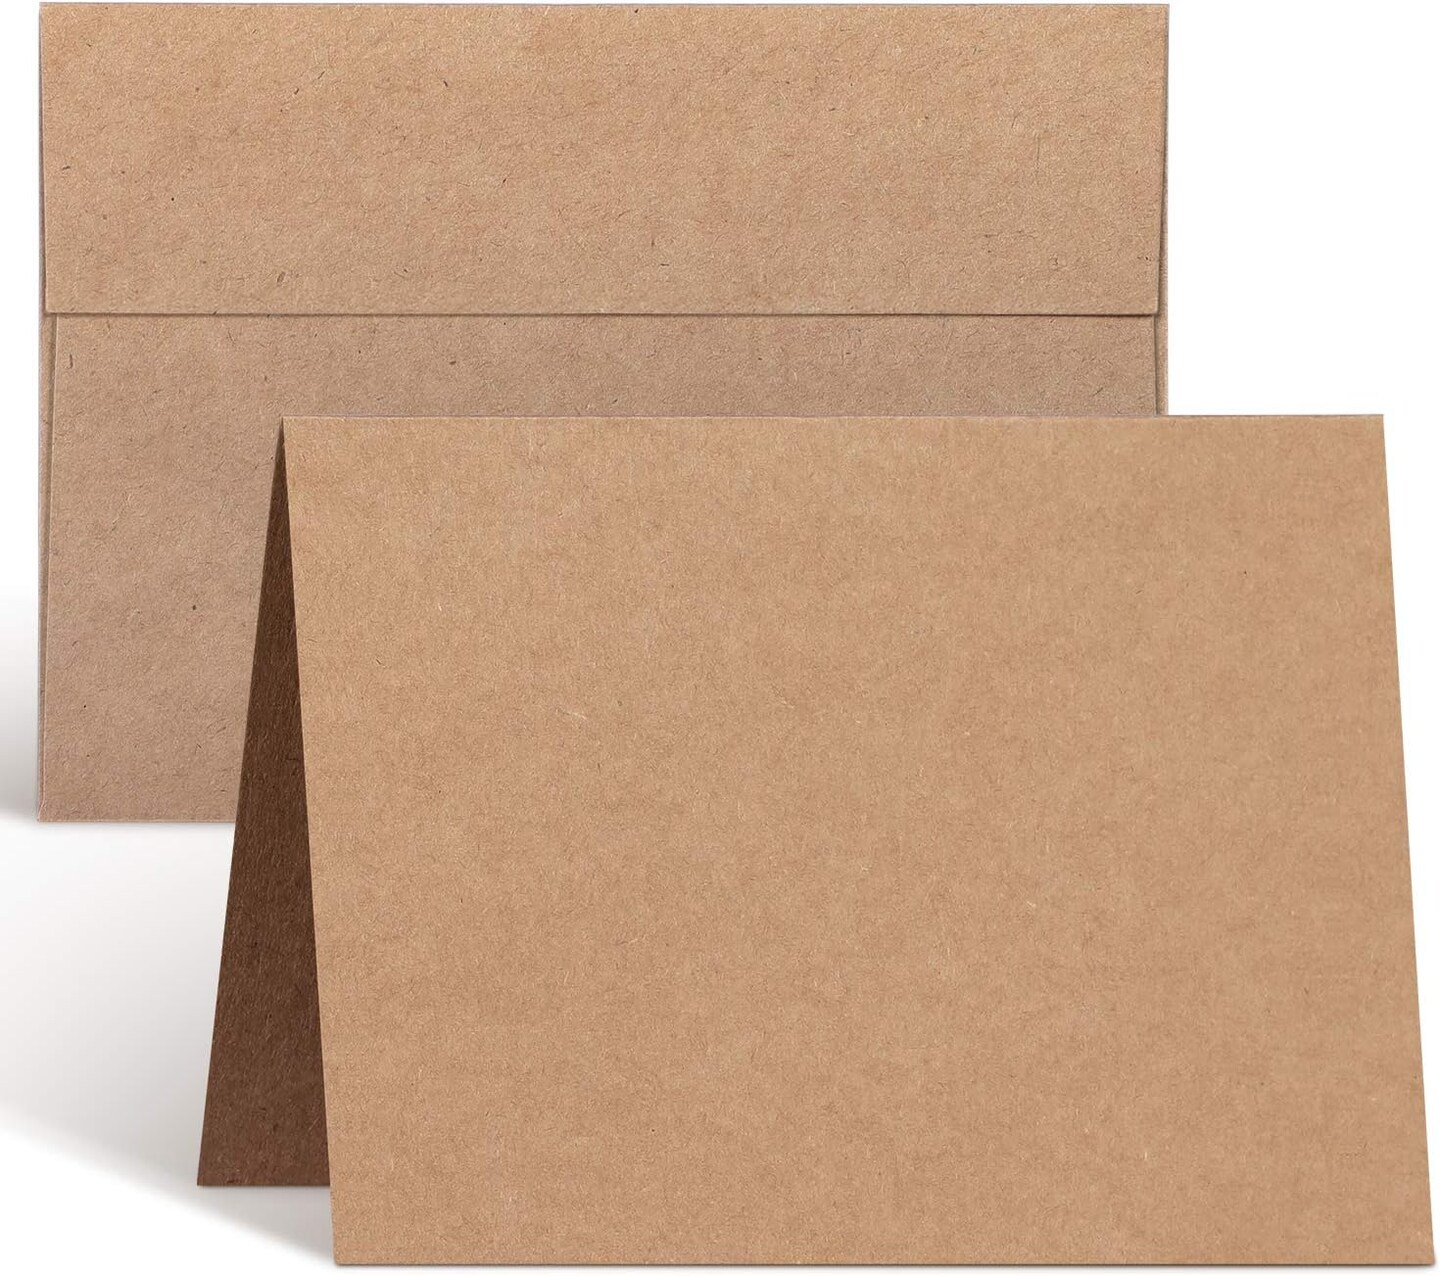 4.25 x 5.5 Cards and Envelopes 100 Pack, Ohuhu Heavyweight Kraft Folded Cardstock Paper and A2 Envelopes for DIY Greeting Card, Wedding, Birthday, Invitations, Thank You Cards &#x26; All Occasion